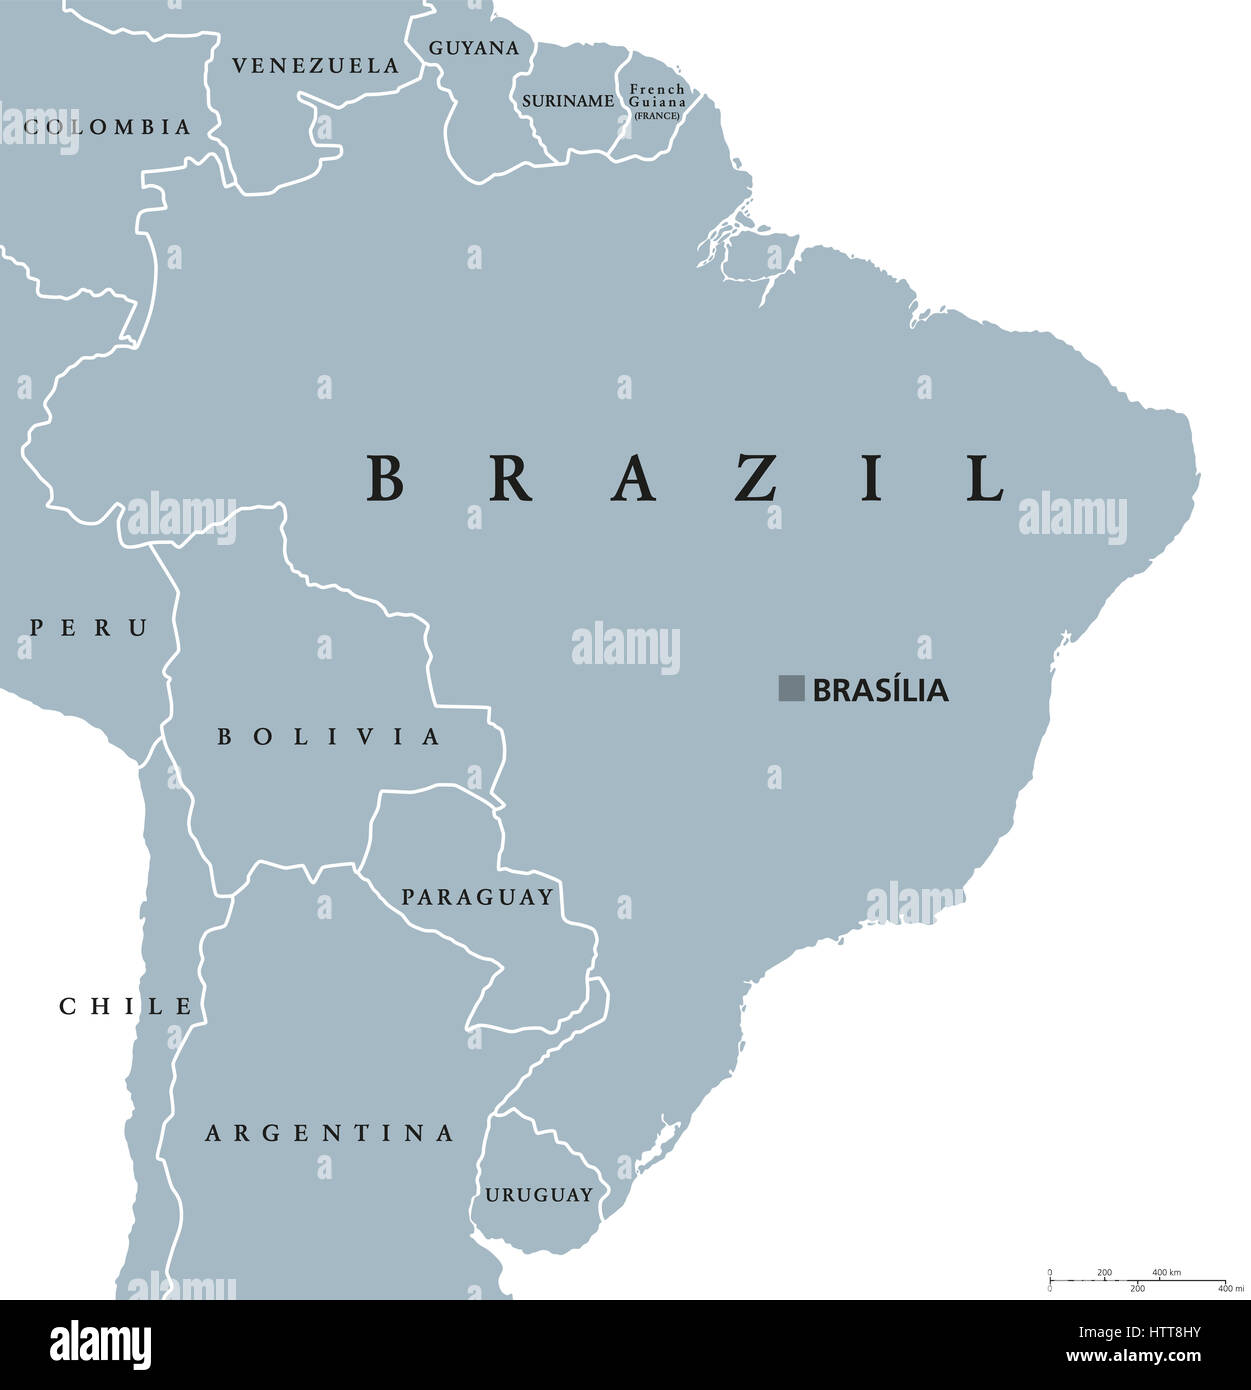 Brazil Locator Map - Country And Capital City Brasilia. Map Of